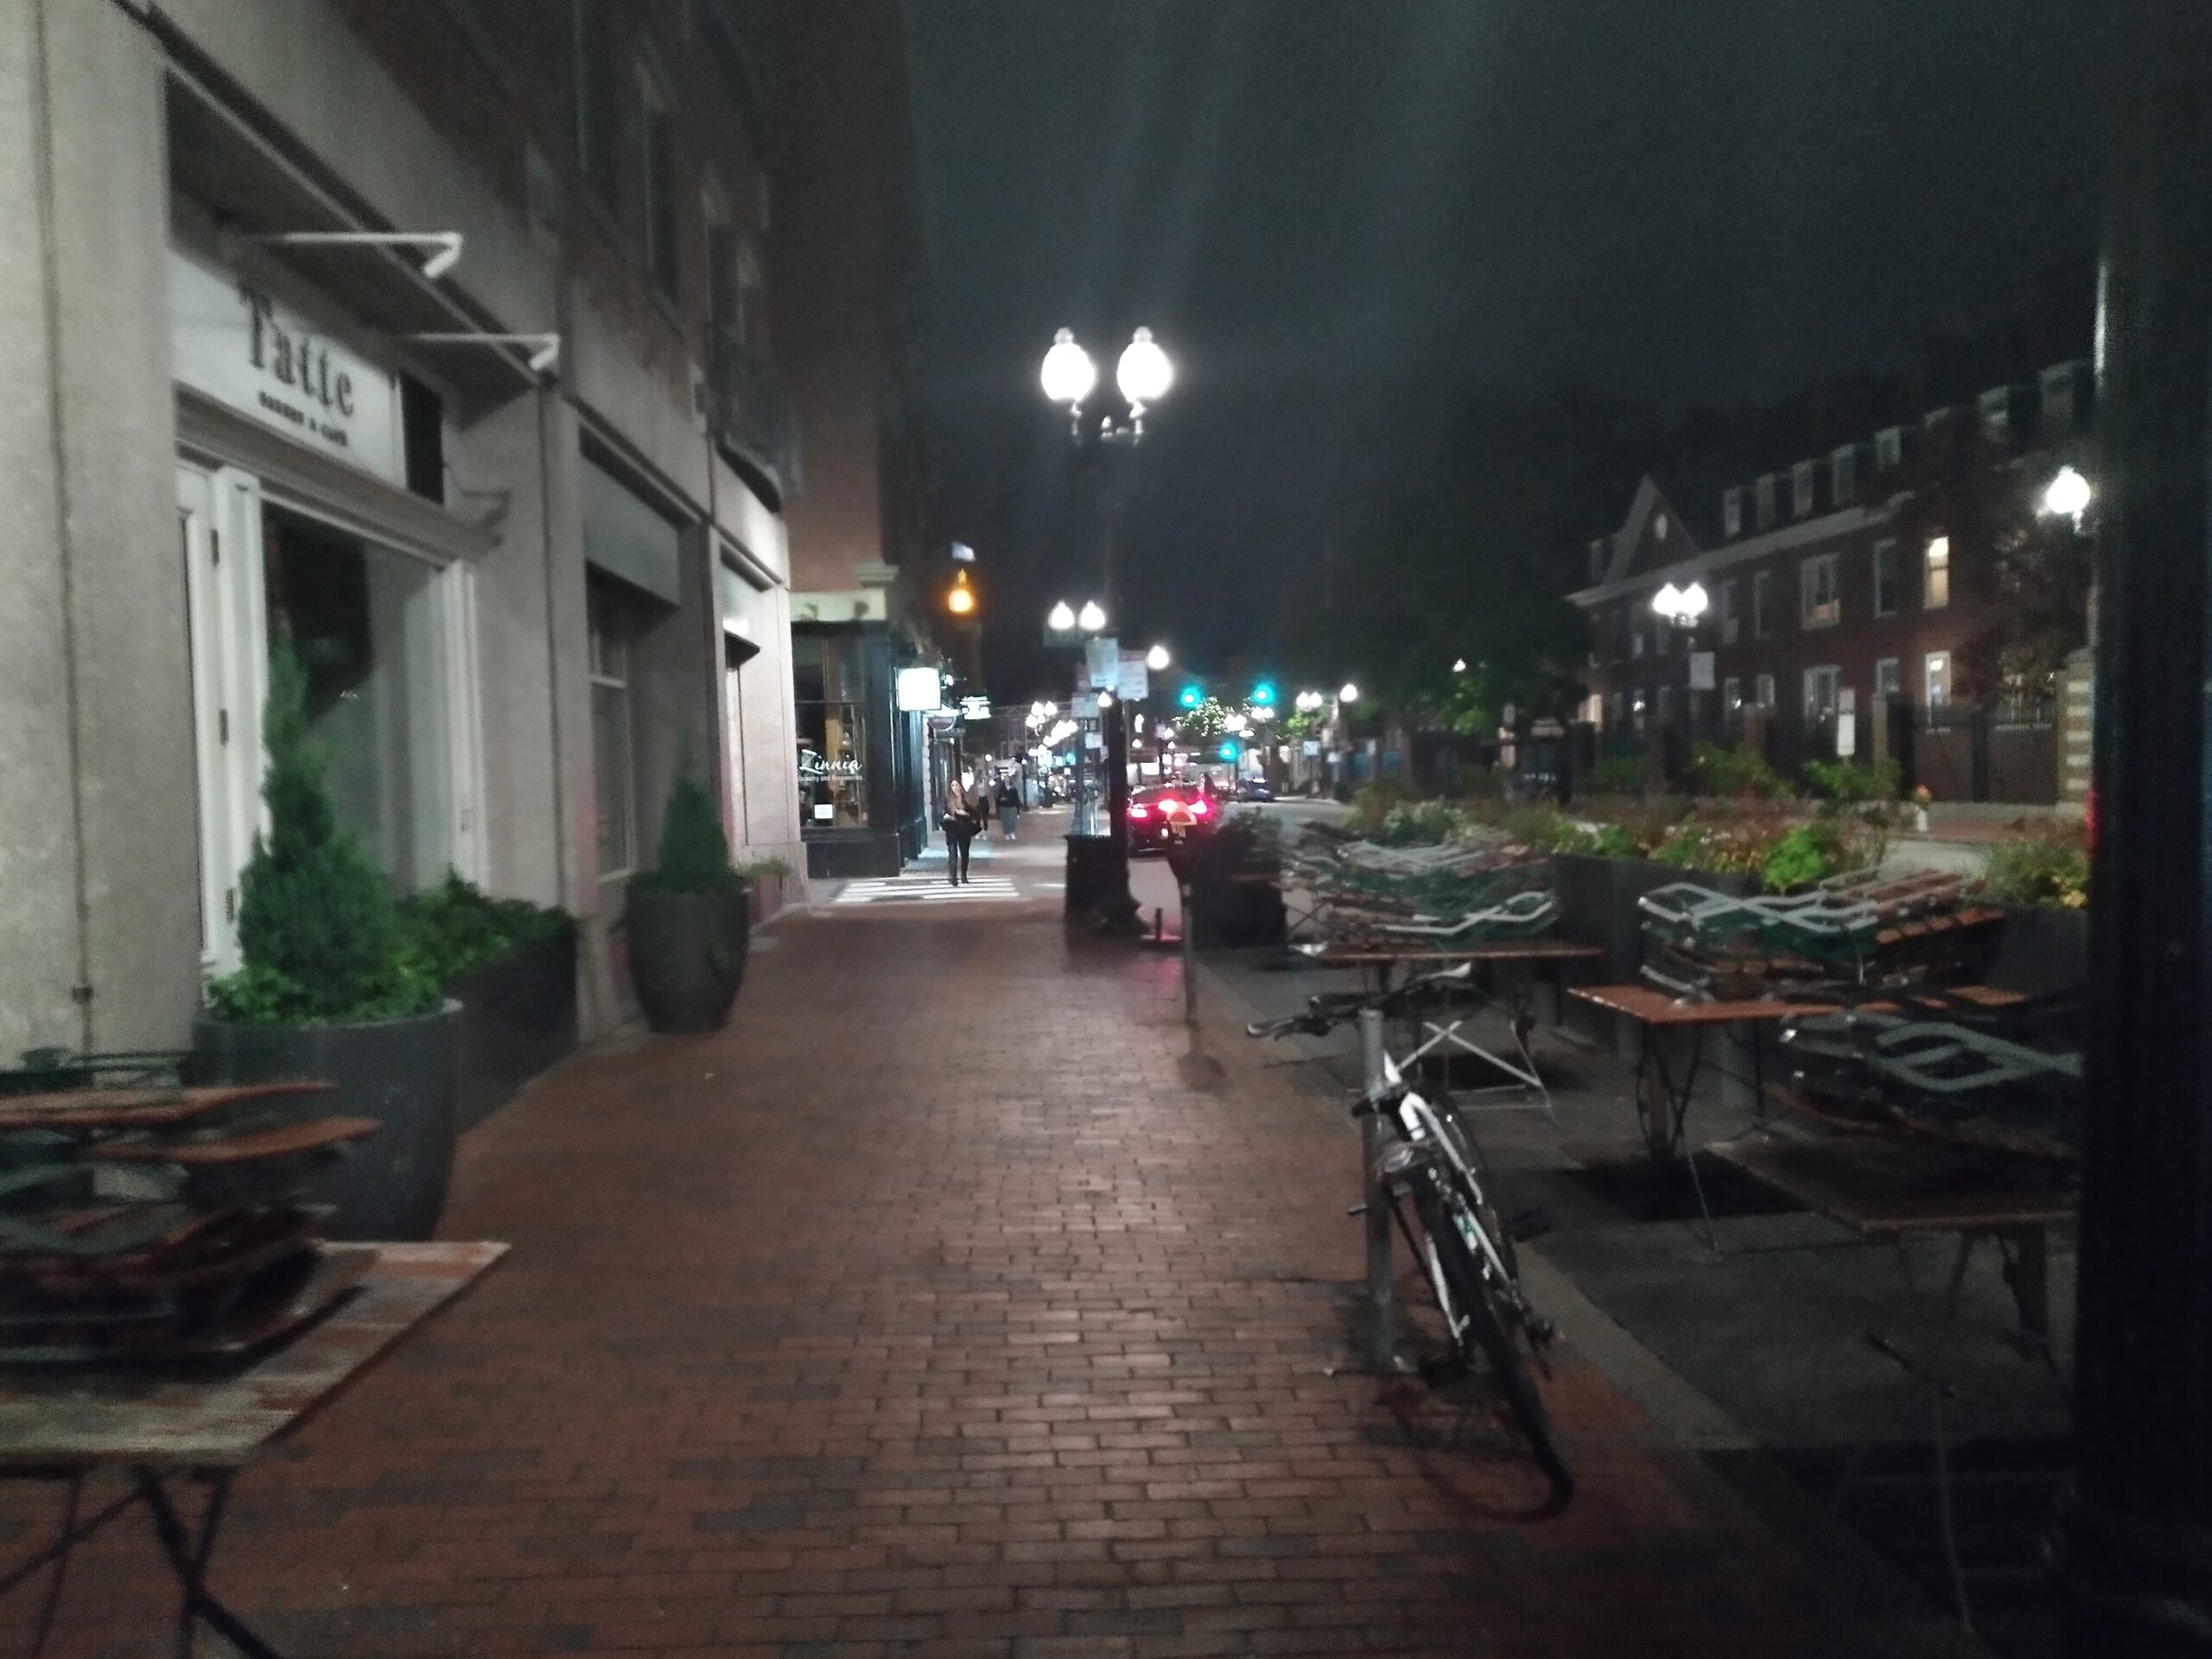 a picture in harvard square in the middle of the night